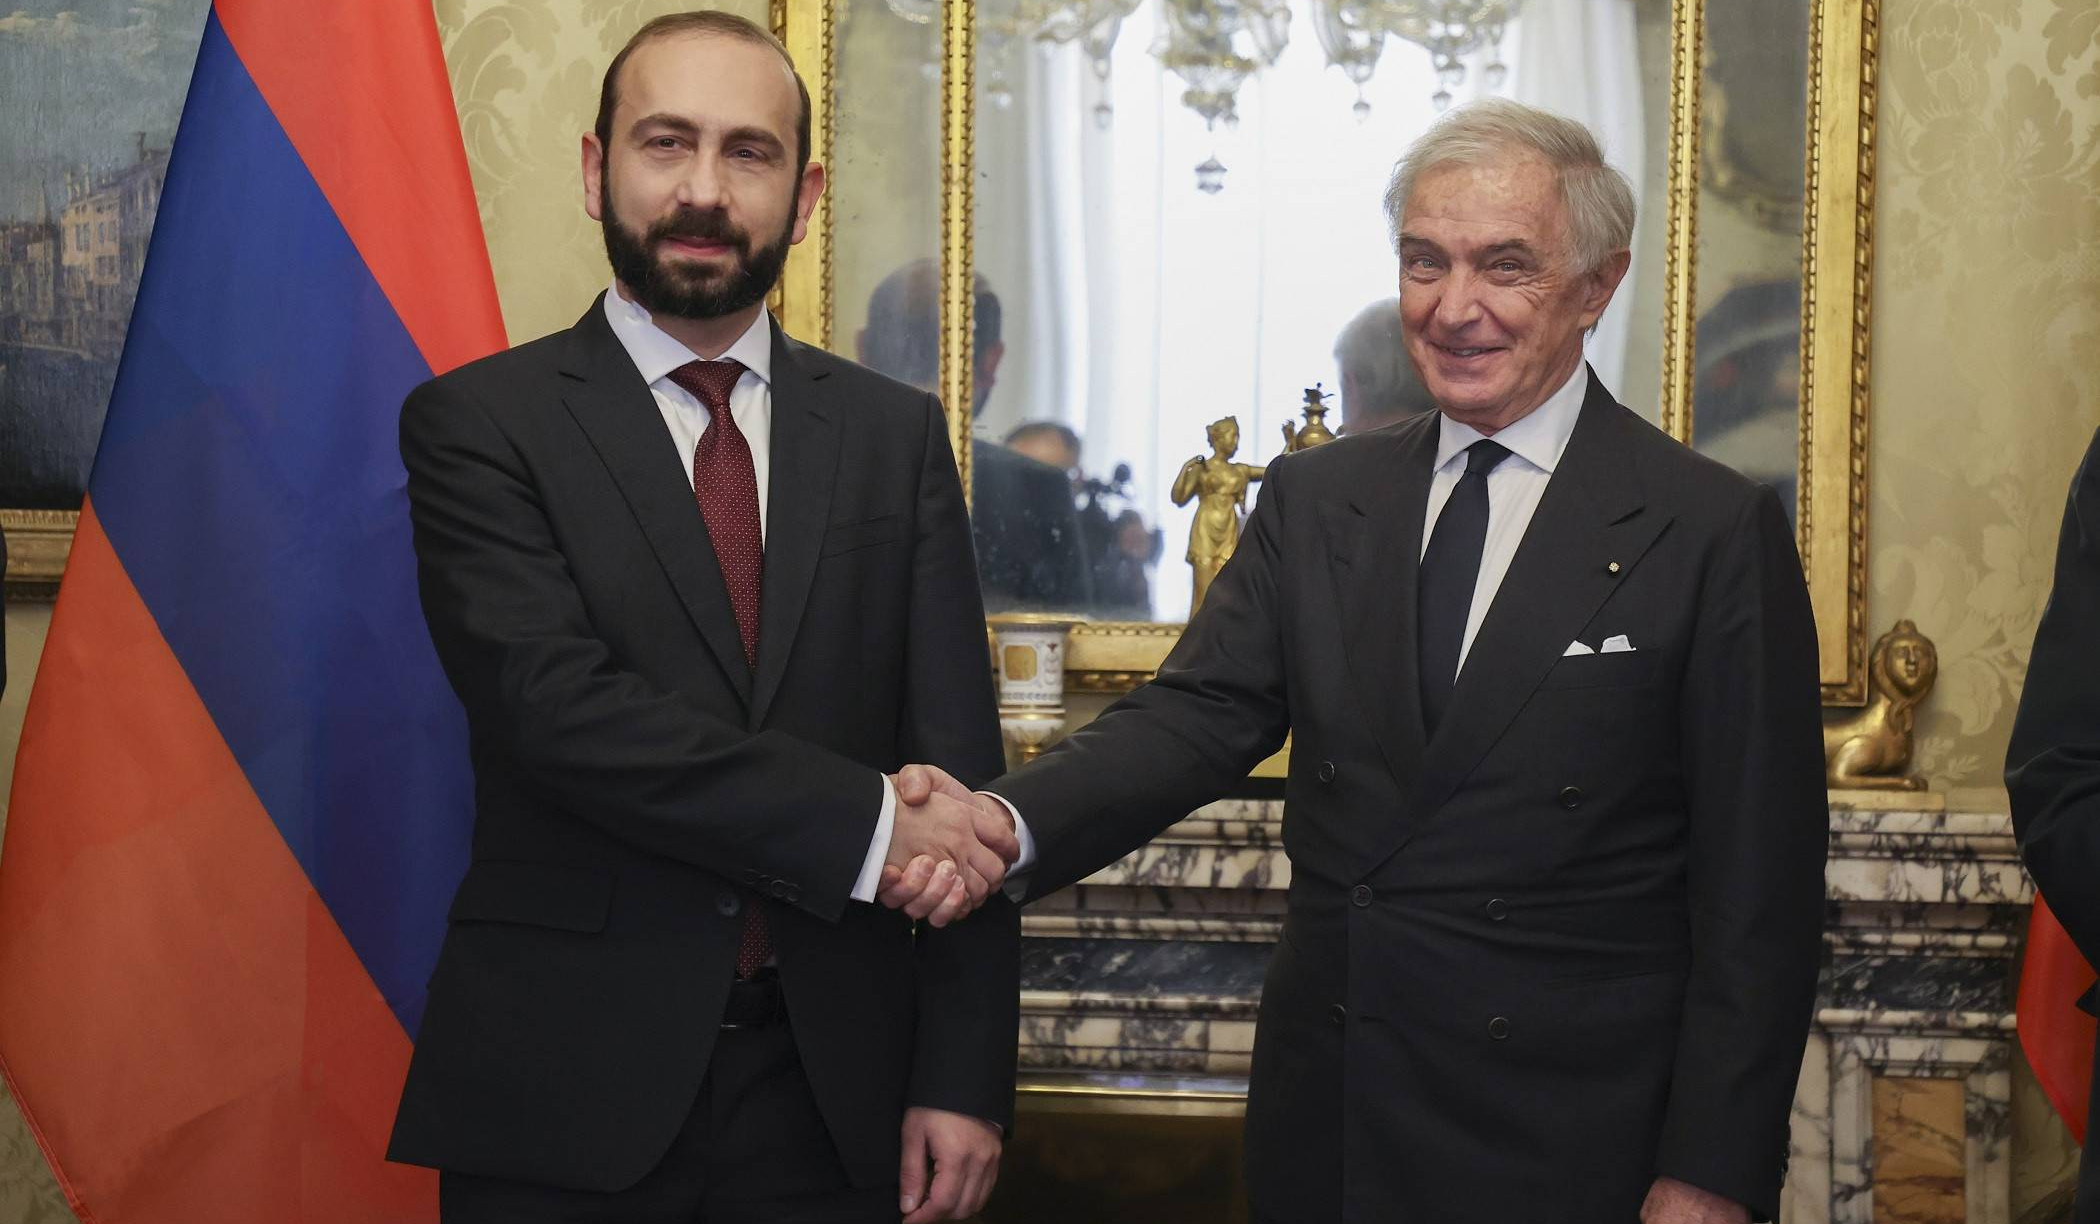 Meeting of the Armenian Minister with the Grand Chancellor of the Sovereign Order of Malta